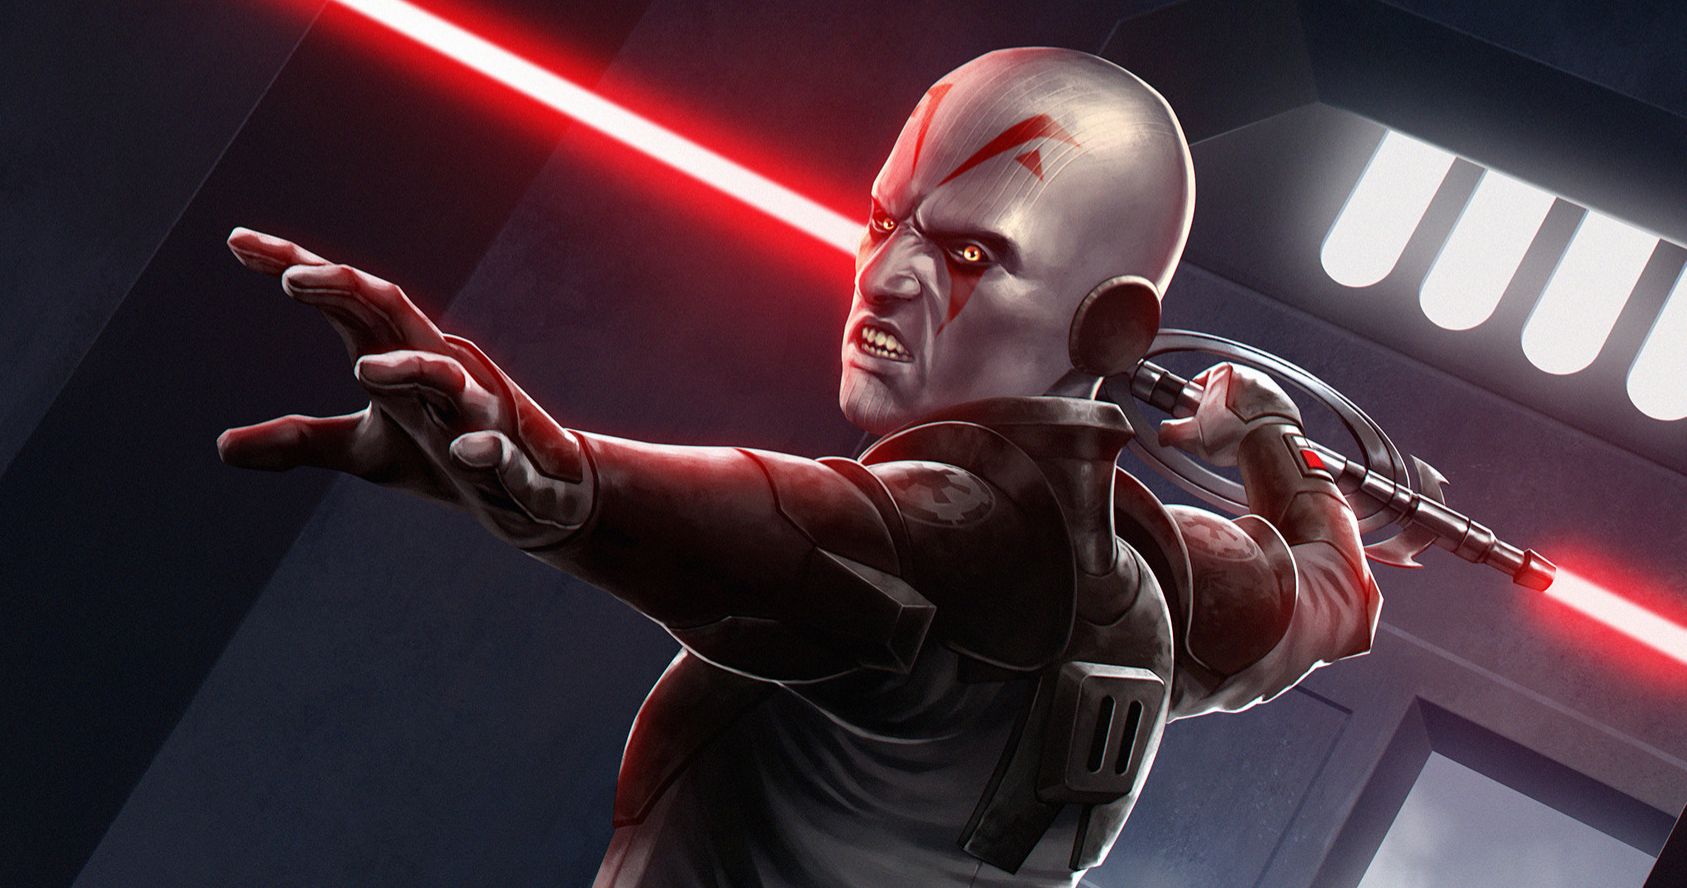 Star Wars Rebels Actor Wants to Reprise Grand Inquisitor Role in Live-Action